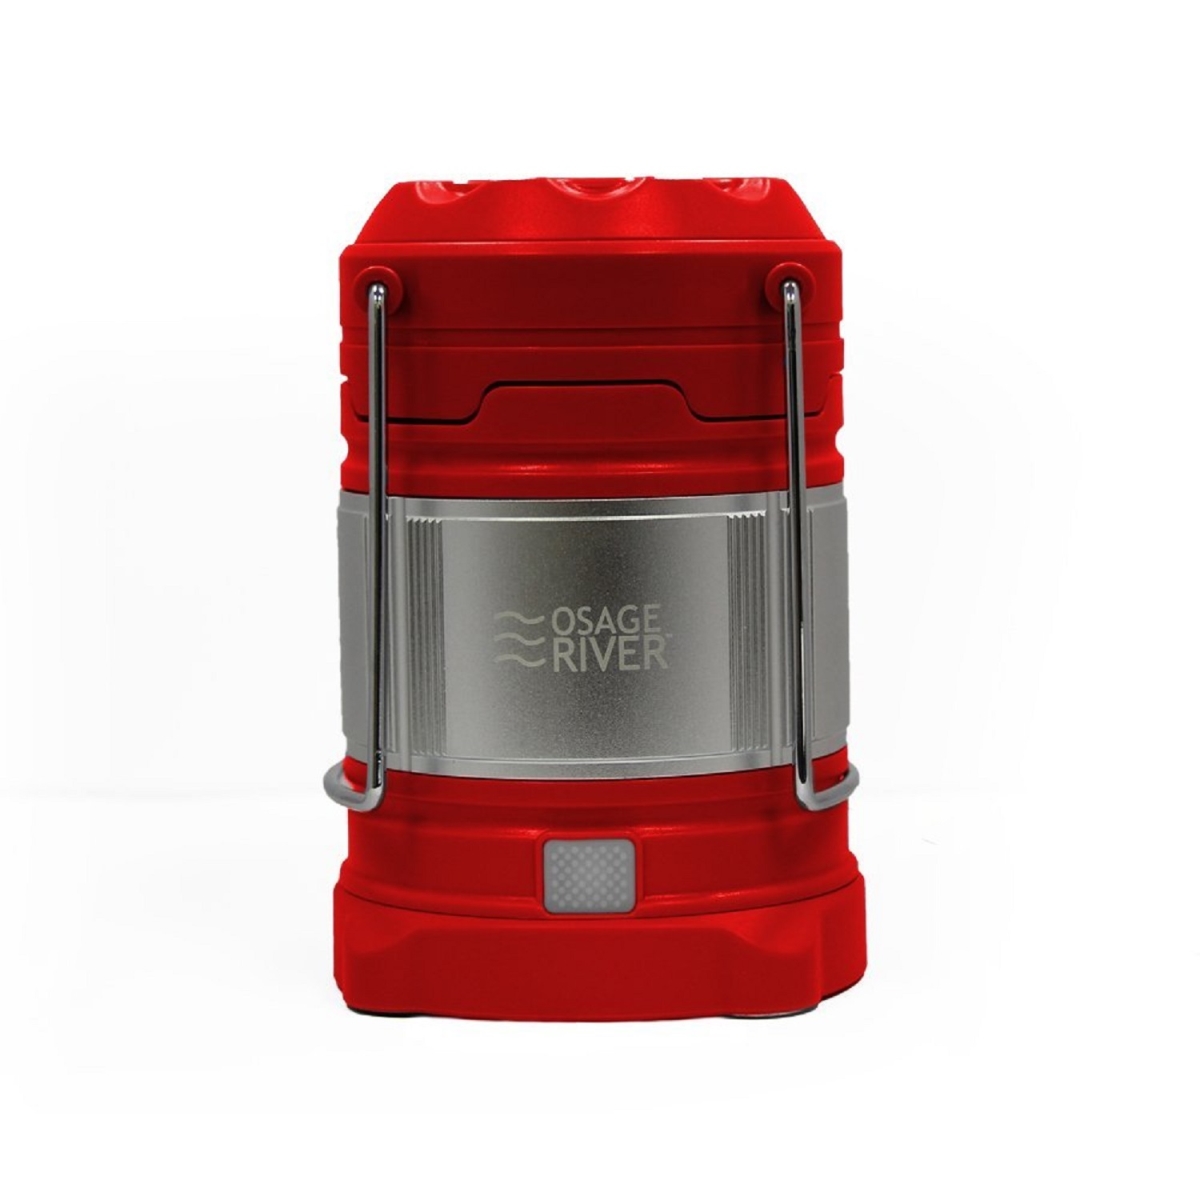 1107970 Led Lantern With Usb Power Bank - Red